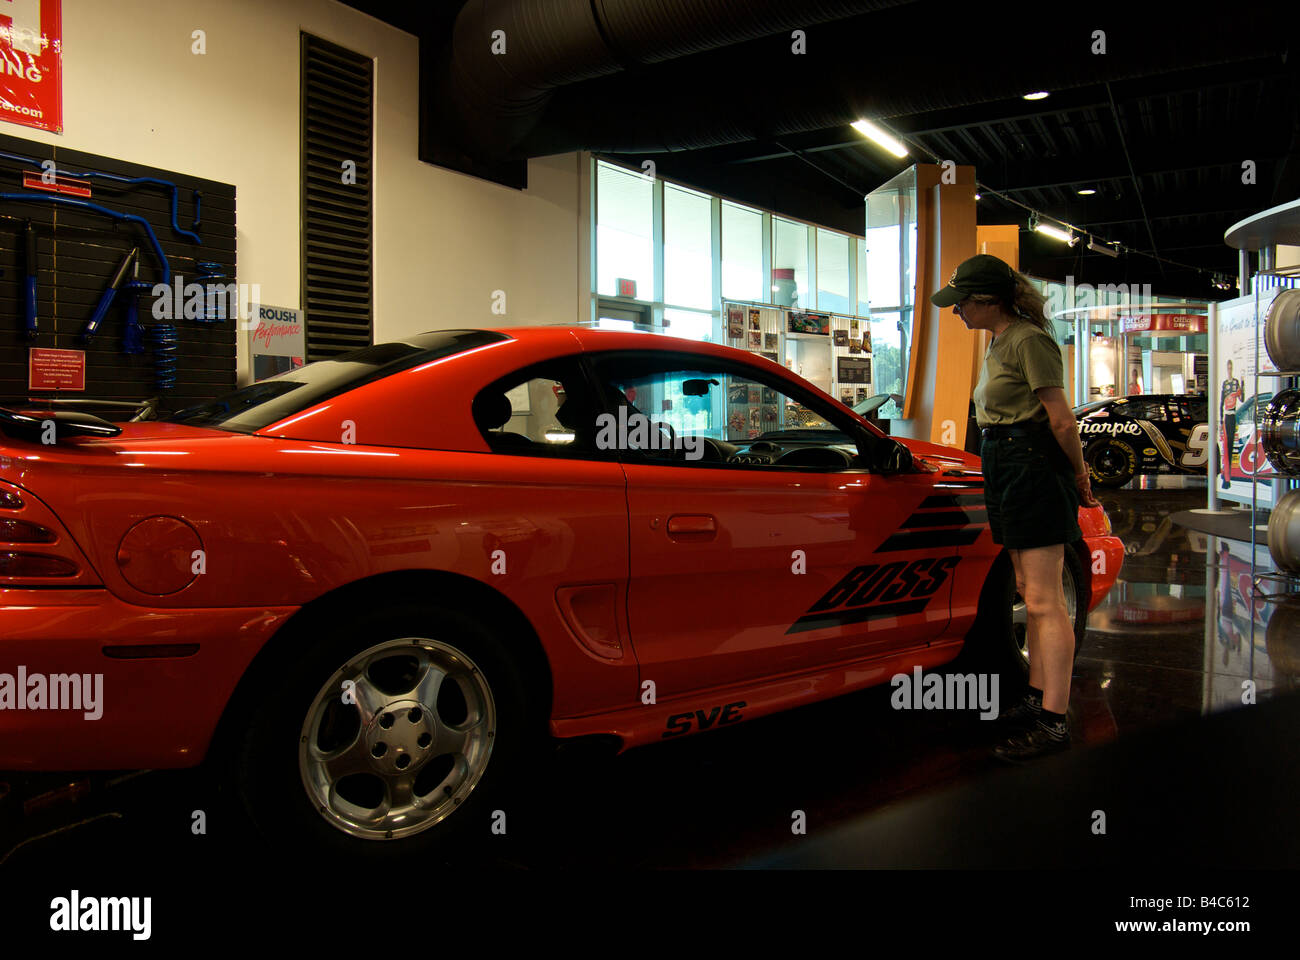 Woman admiring a Ford Boss Mustang race car at the Roush Fenway Racing museum Stock Photo